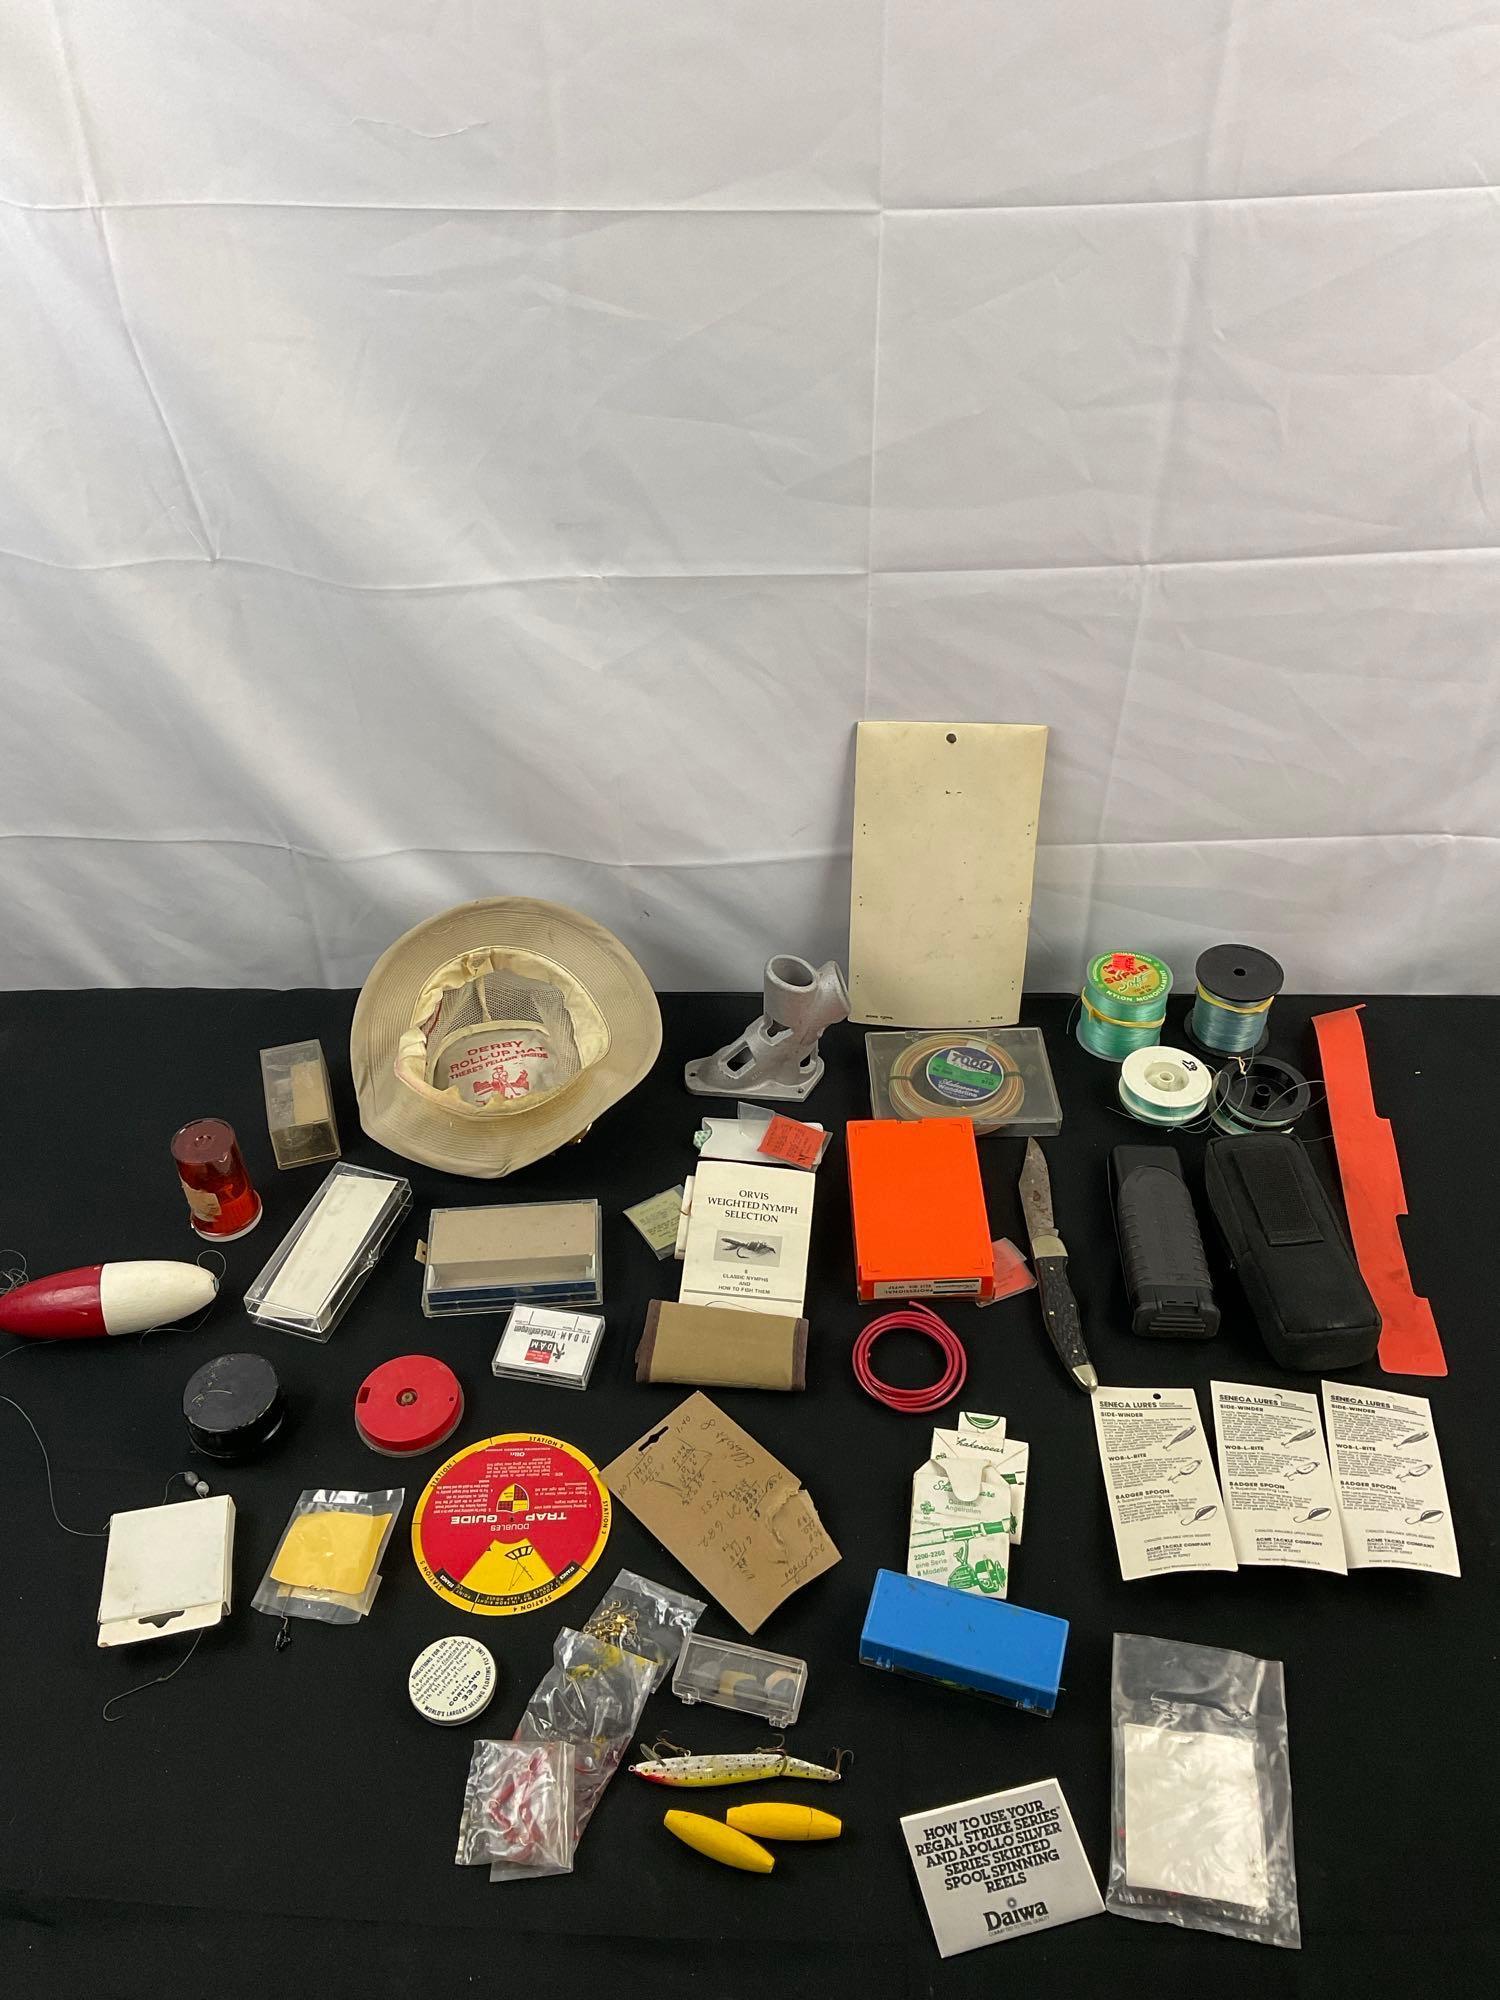 44 pcs Vintage Fly Fishing Tools & Accessories Assortment. Magellan GPS 4000 XL. Shakespeare. See